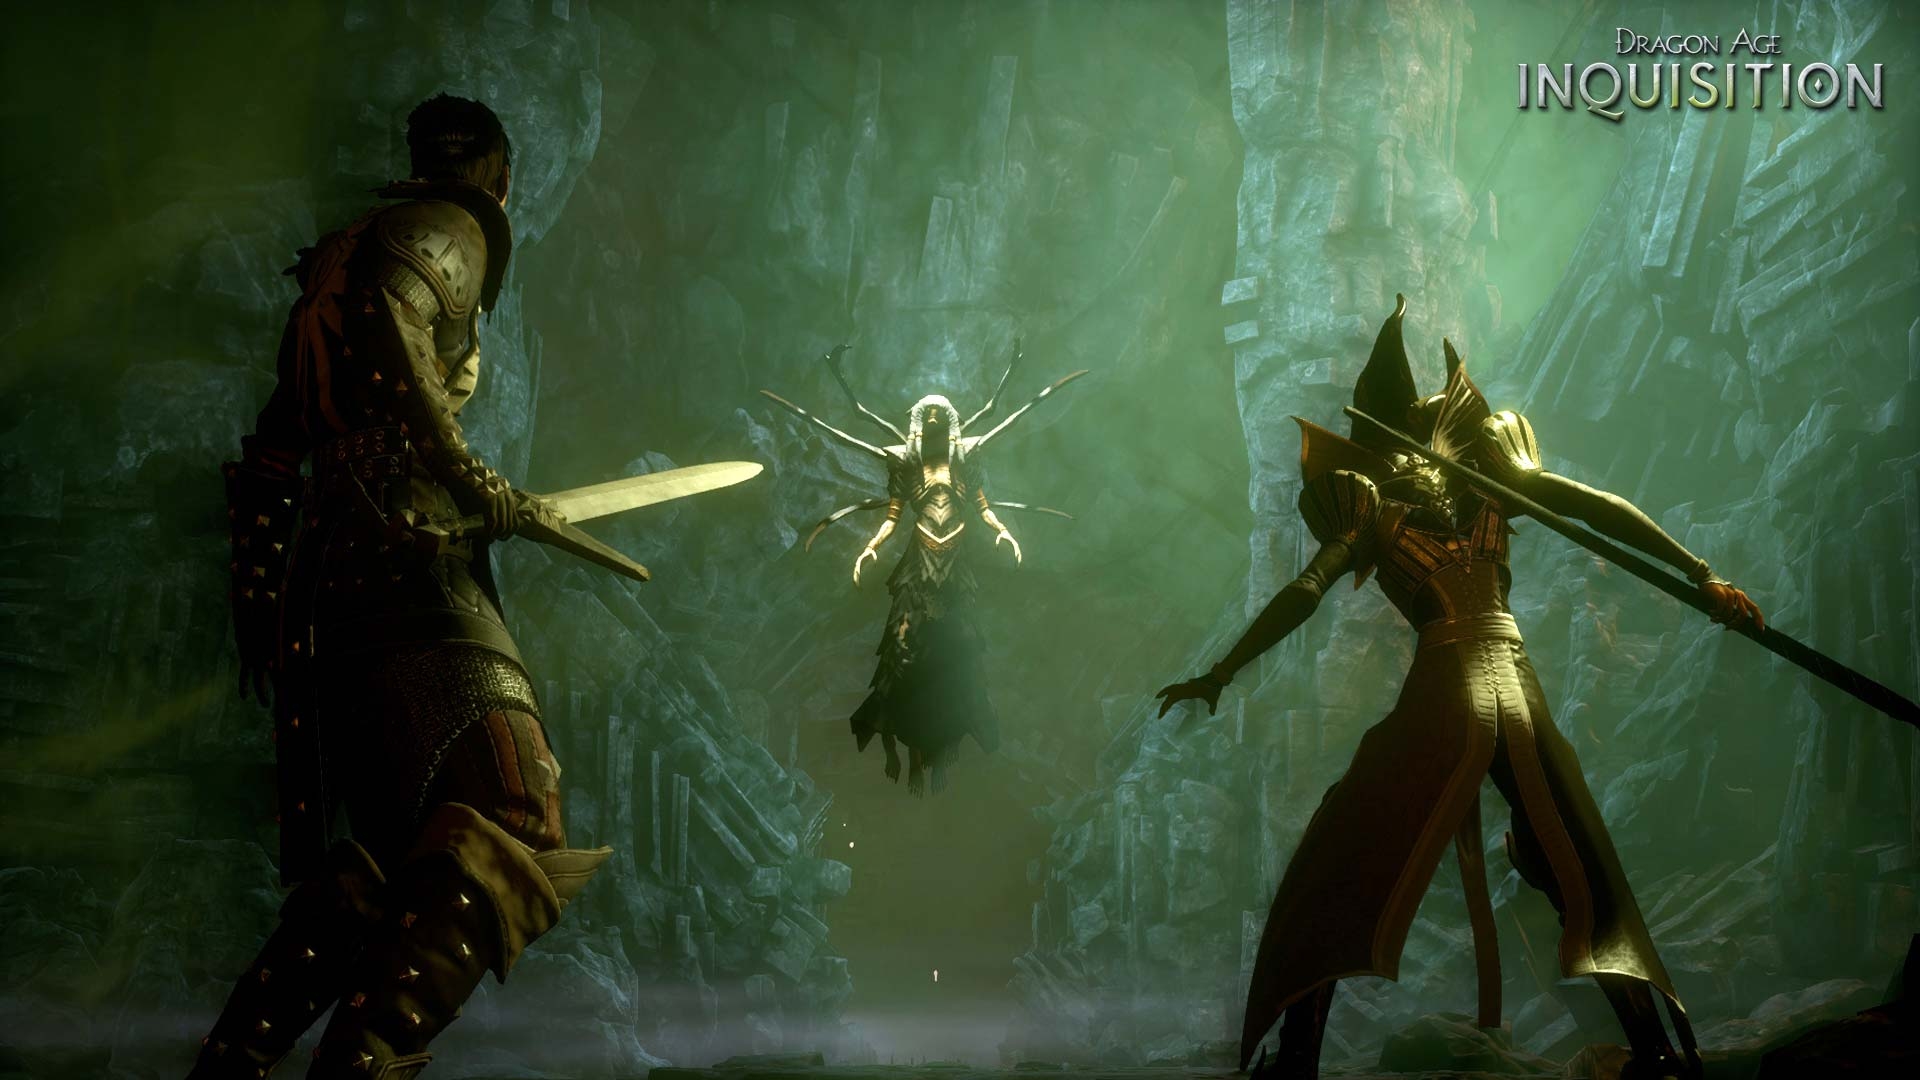 Inquisition Hd Wallpaper - Dragon Age Inquisition , HD Wallpaper & Backgrounds